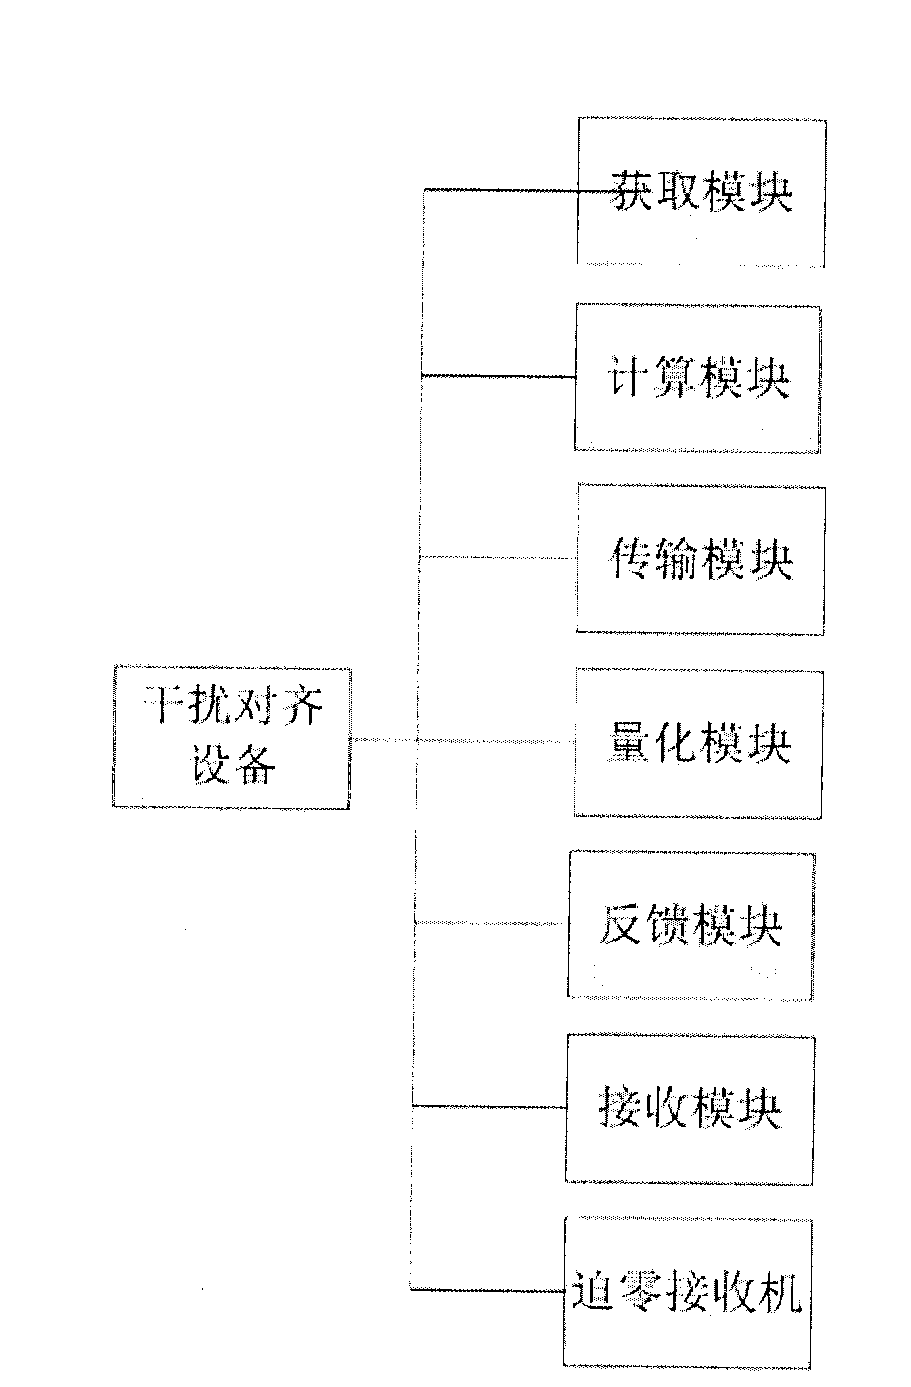 Interference alignment method of up cell